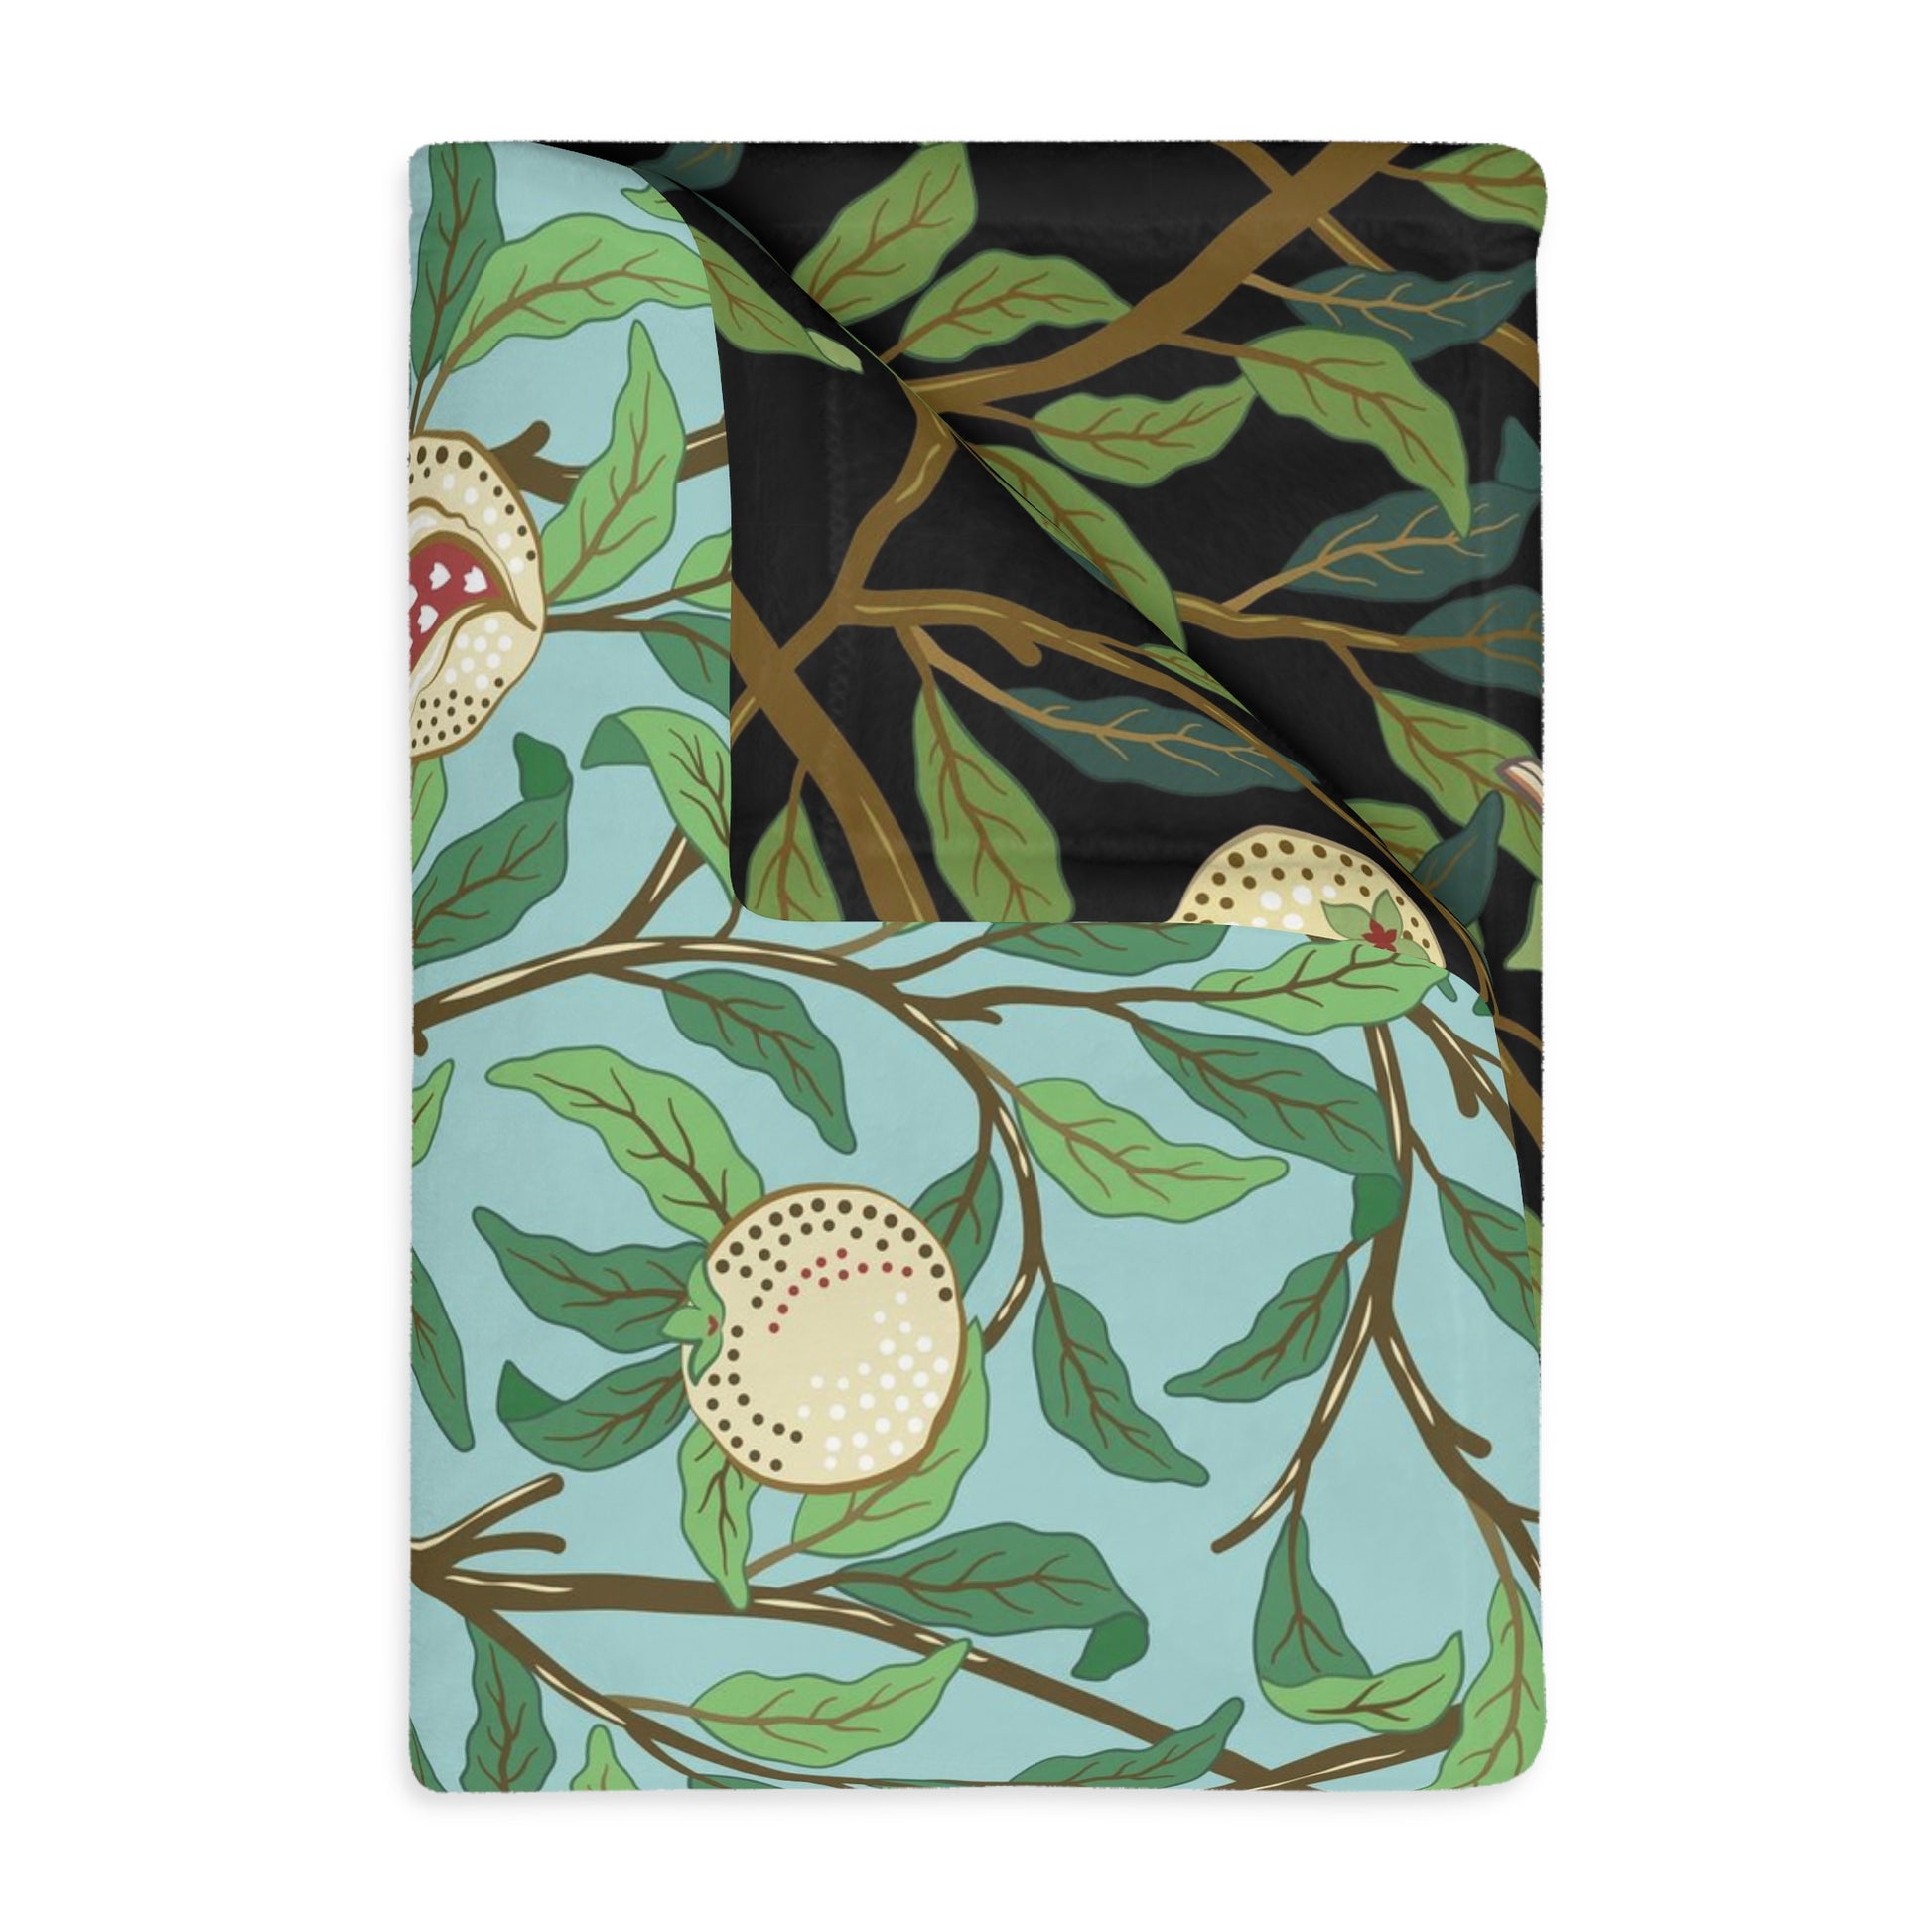 william-morris-co-luxury-velveteen-minky-blanket-two-sided-print-bird-and-pomegranate-collection-tiffany-blue-onyx-4